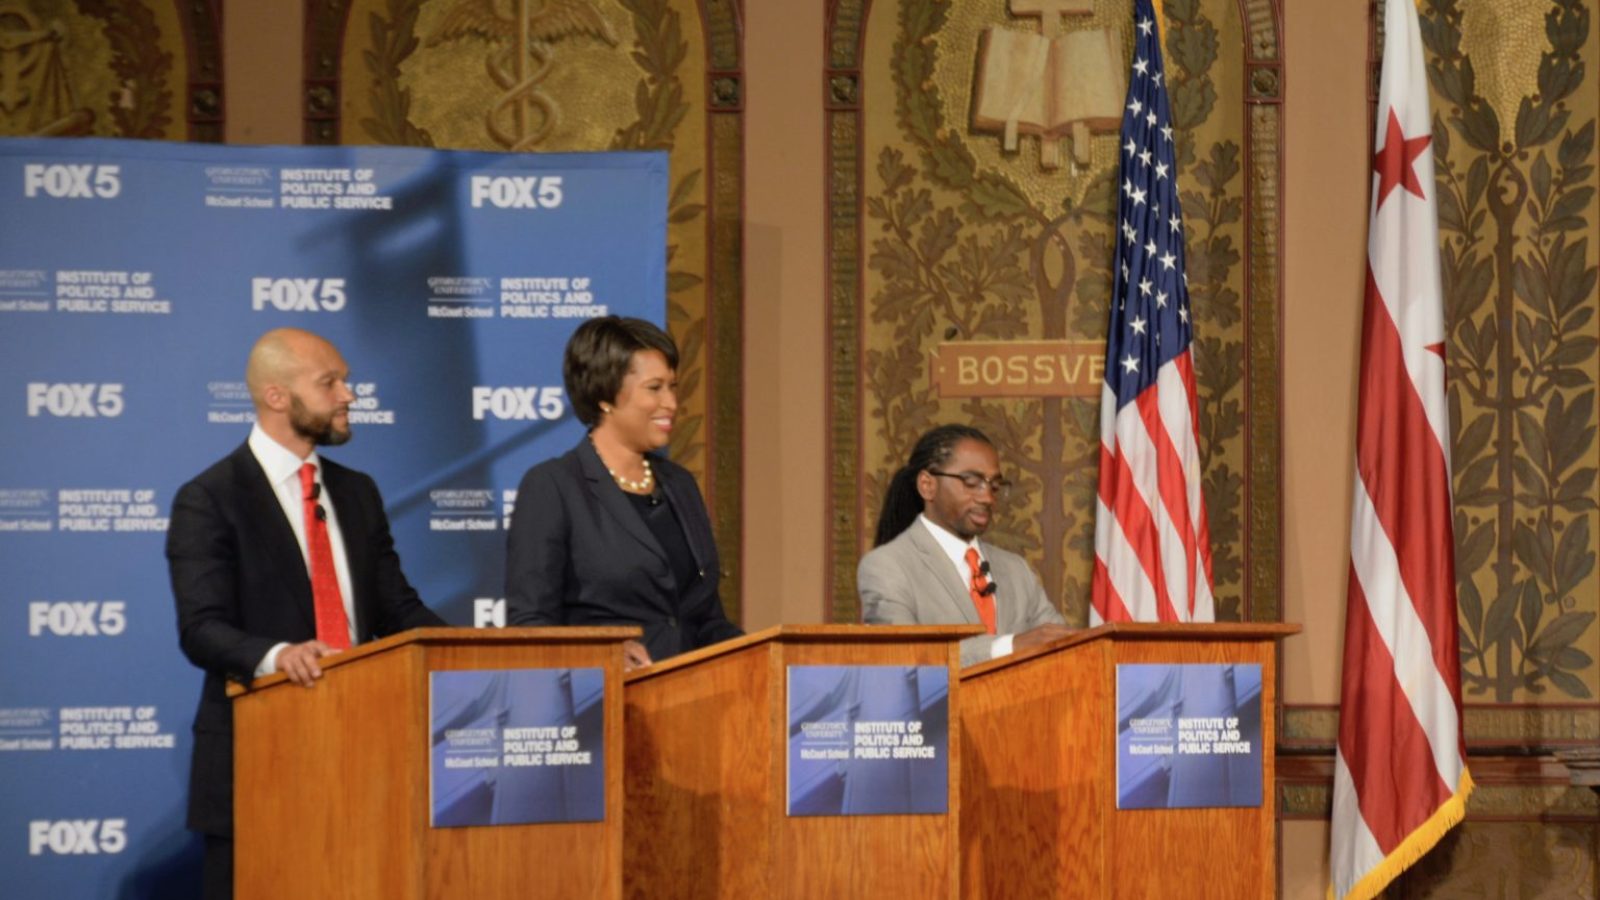 Mayoral Candidates Mayor Muriel Bowser and her main Democratic challengers, Council members Robert White and Trayon White met at Georgetown University's Gaston Hall June 1